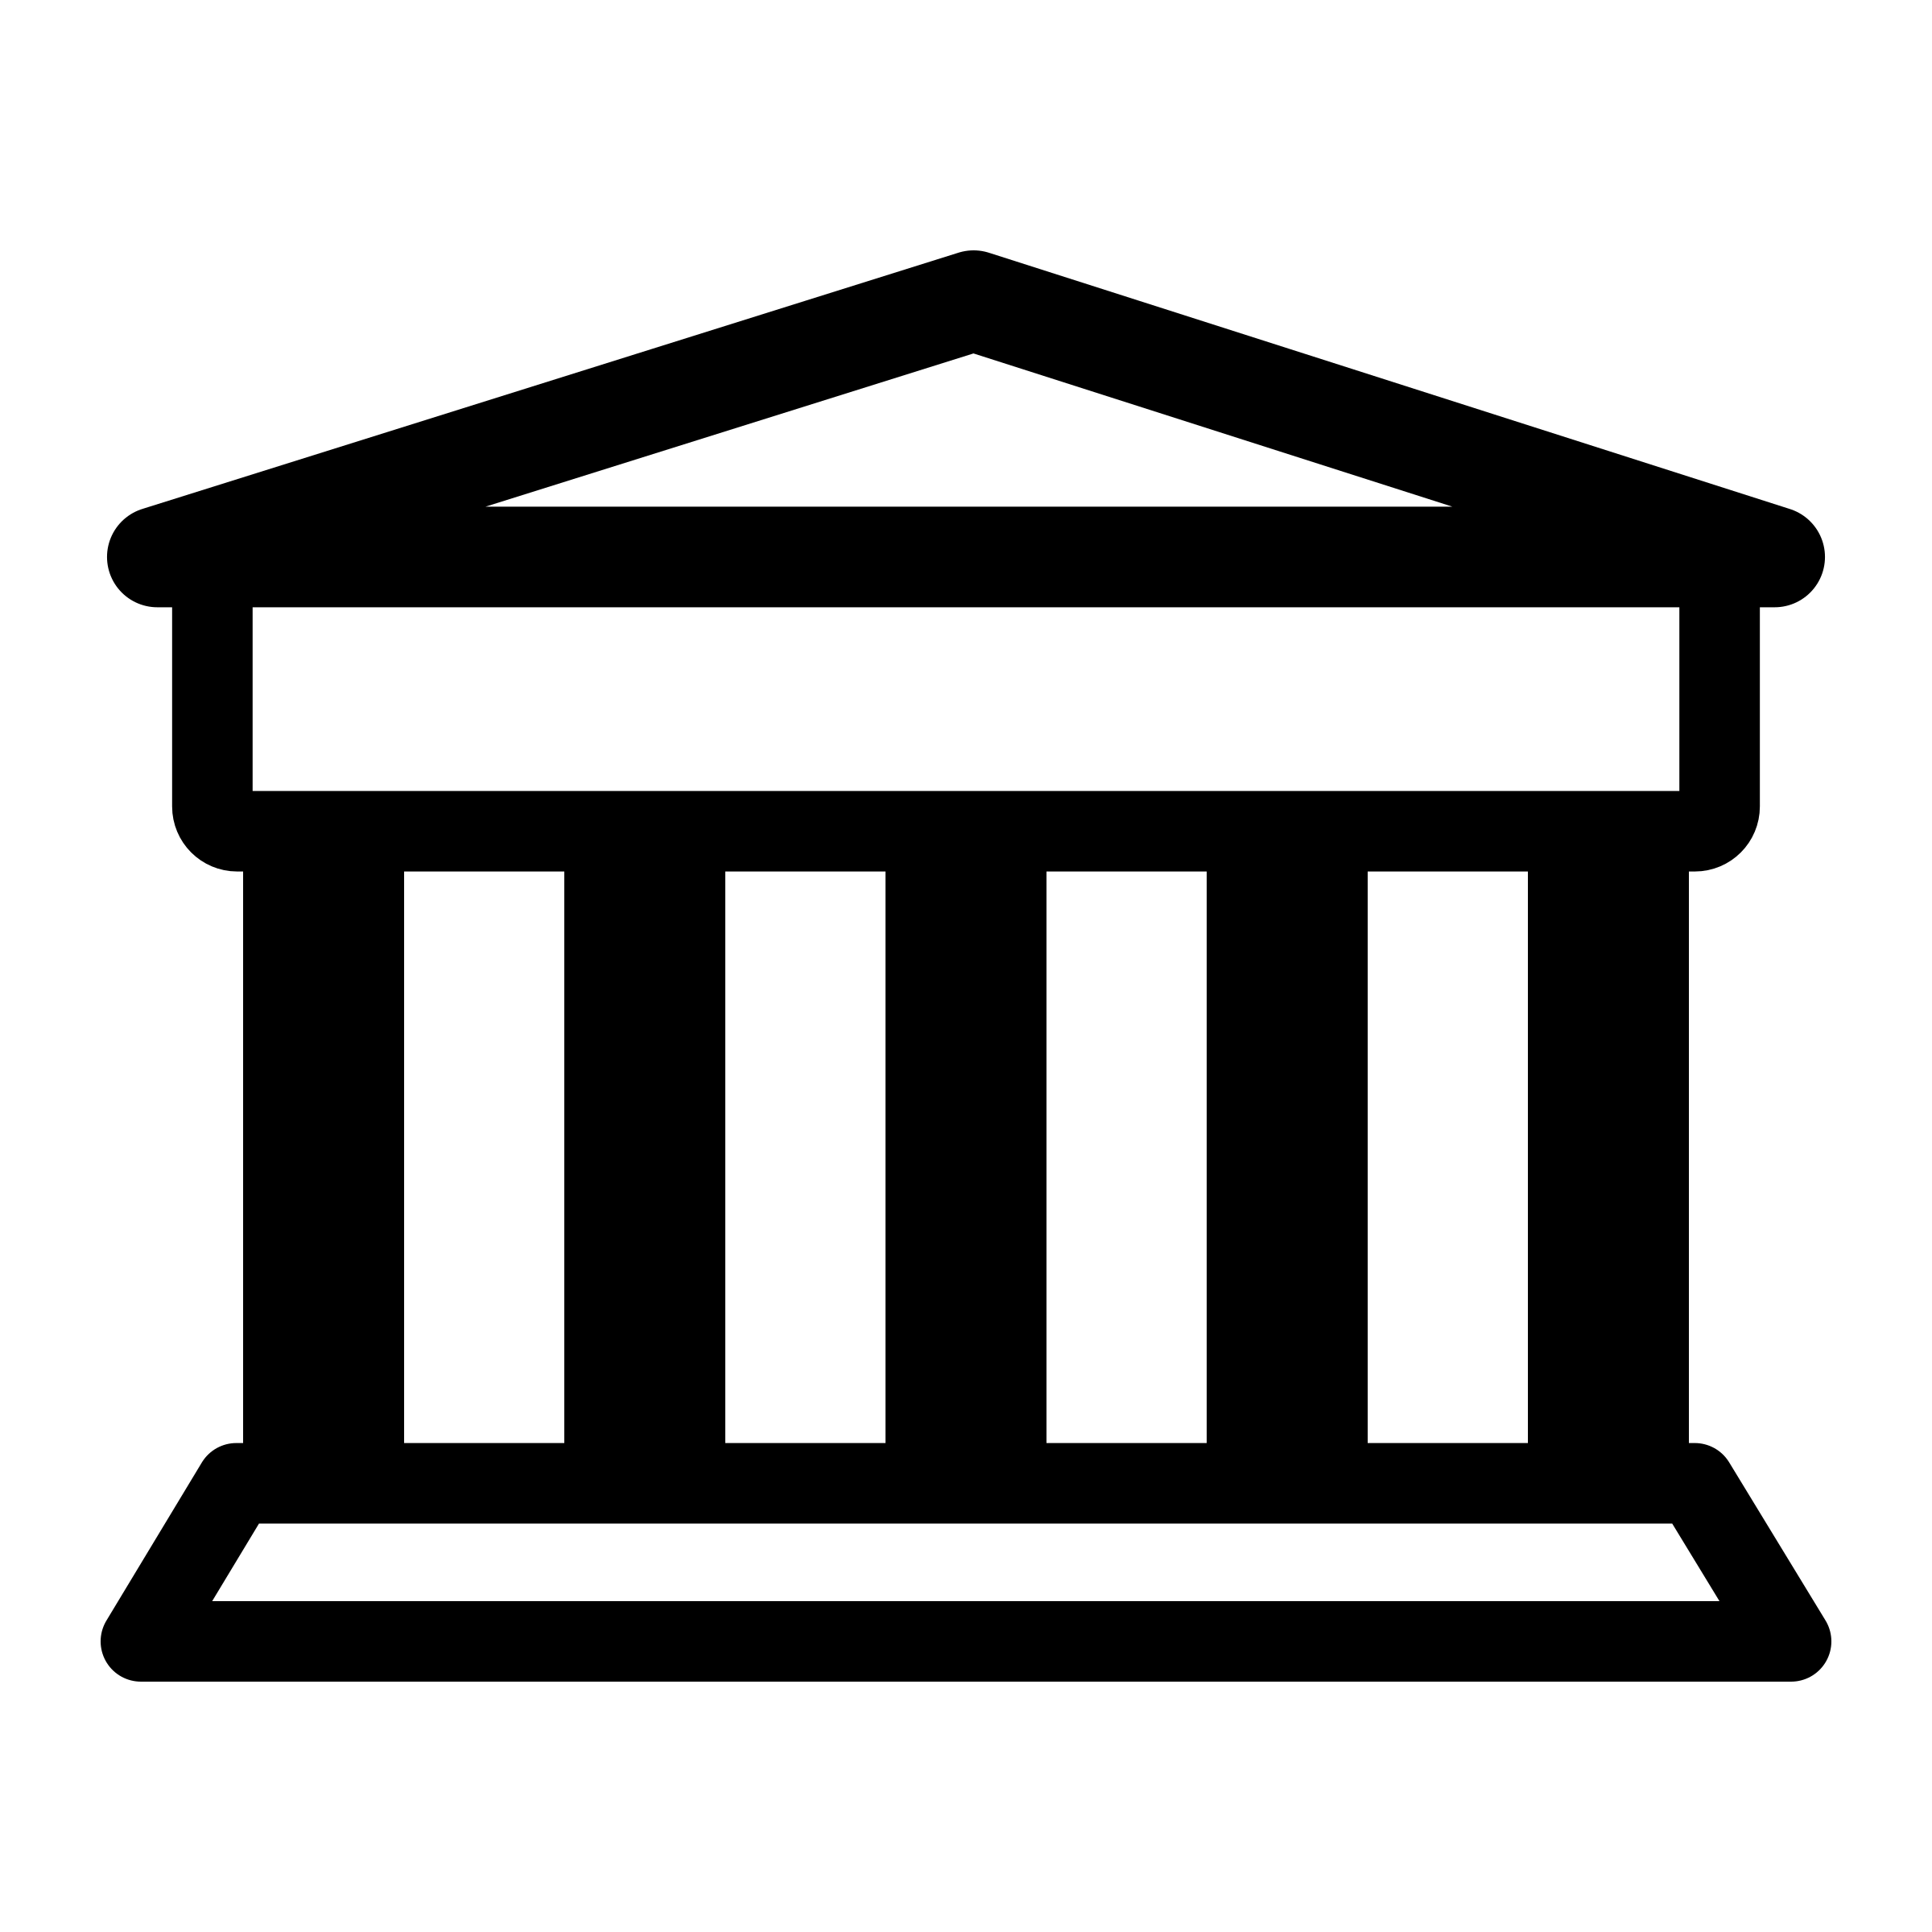 Animated Bank PNG Image Background